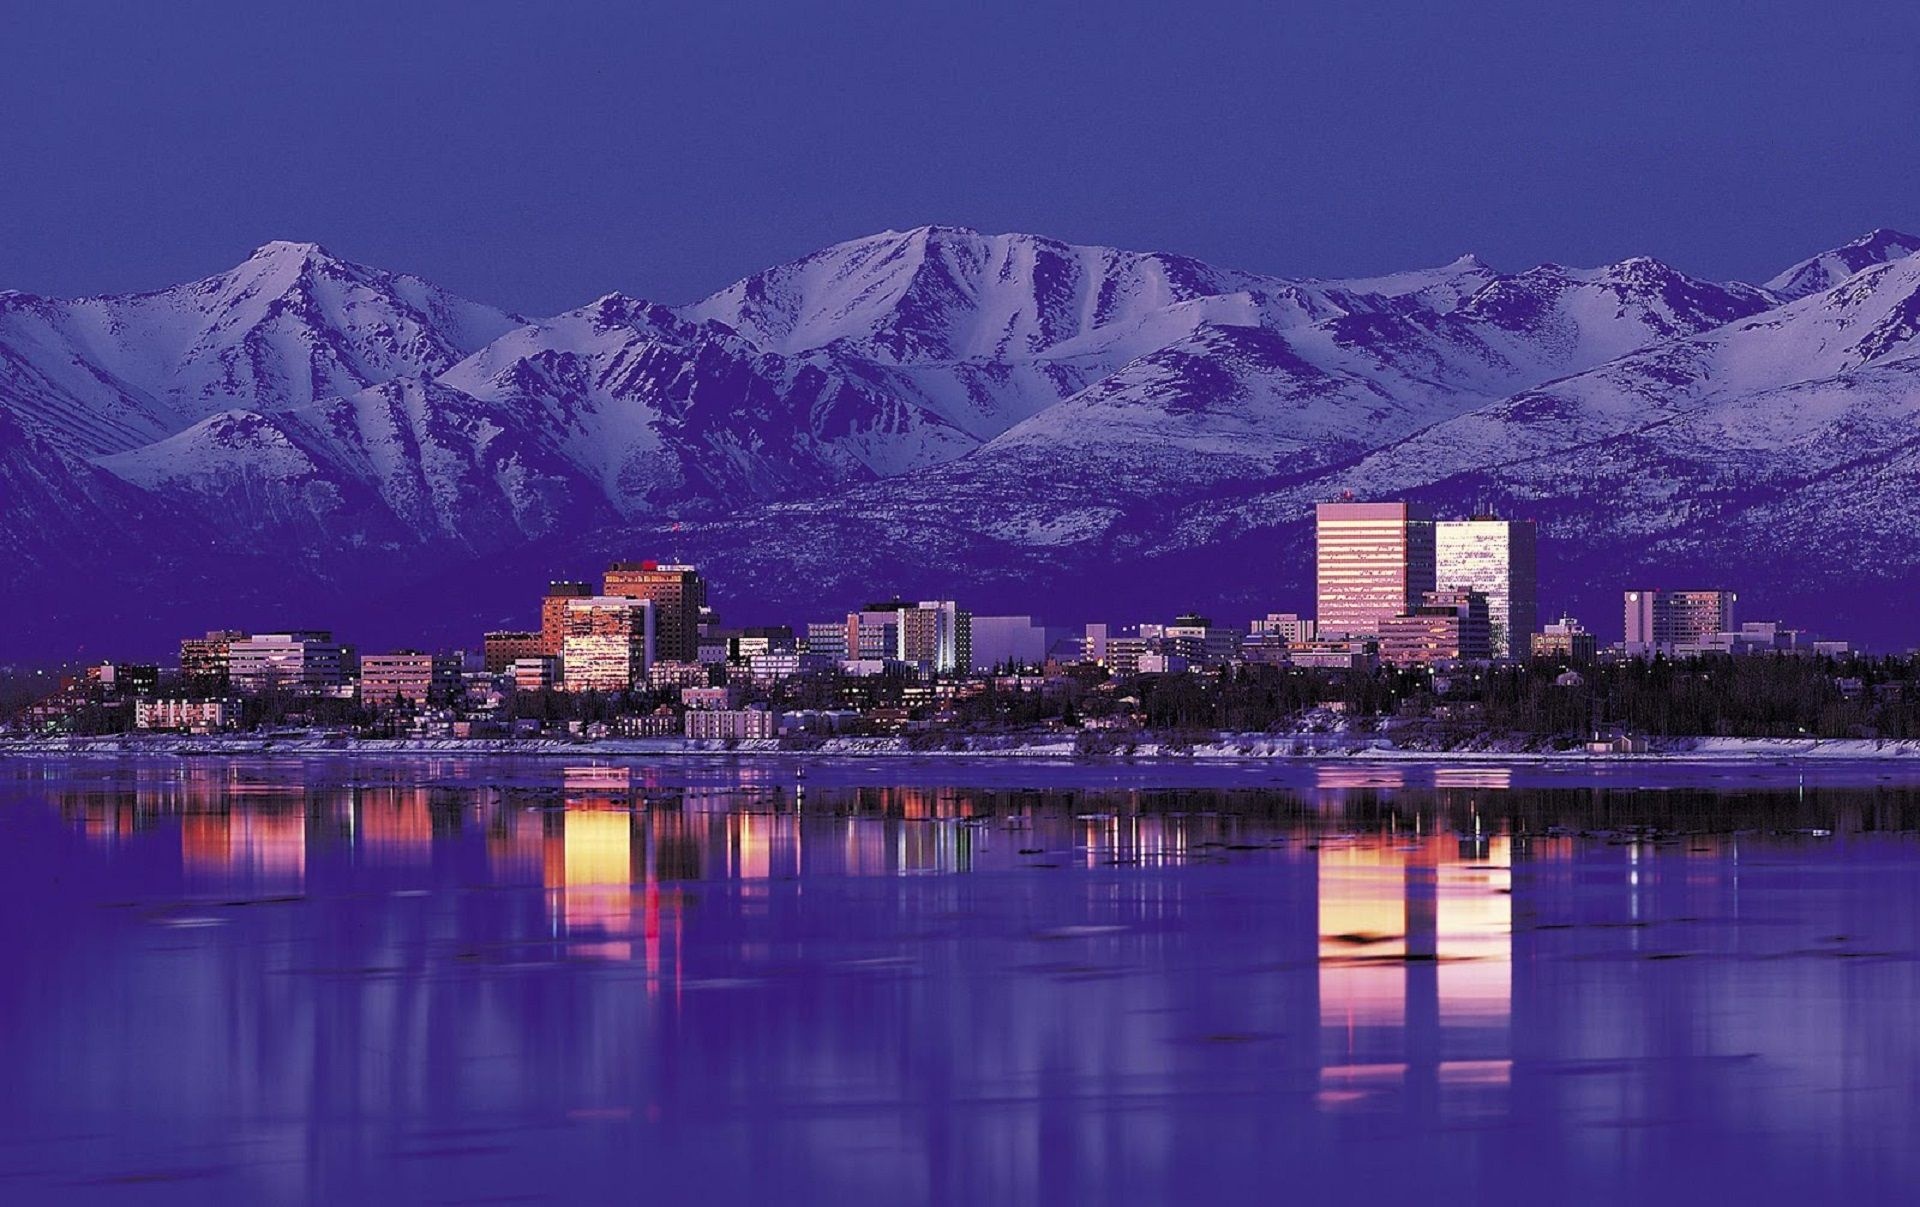 Anchorage wallpapers, Stunning backgrounds, Cityscape beauty, Photography inspiration, 1920x1210 HD Desktop